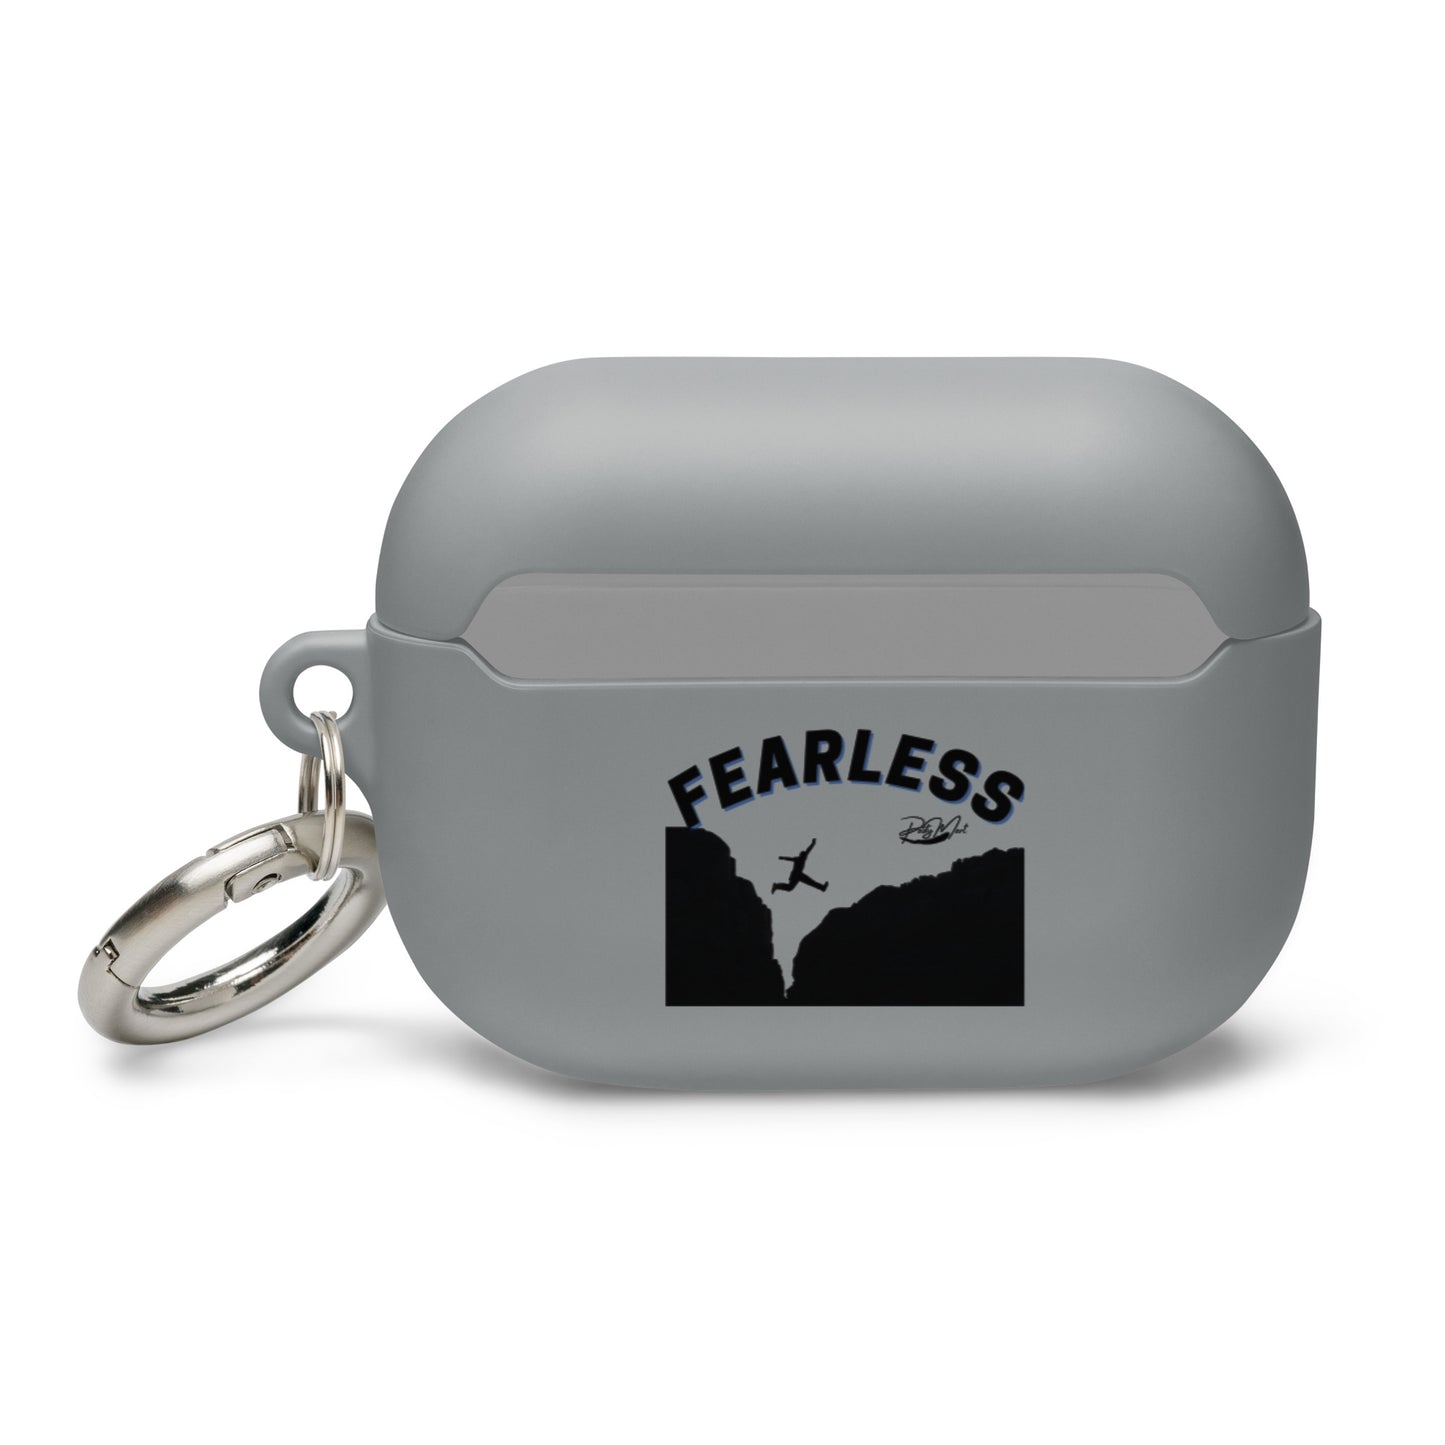 Fearless AirPods Pro case